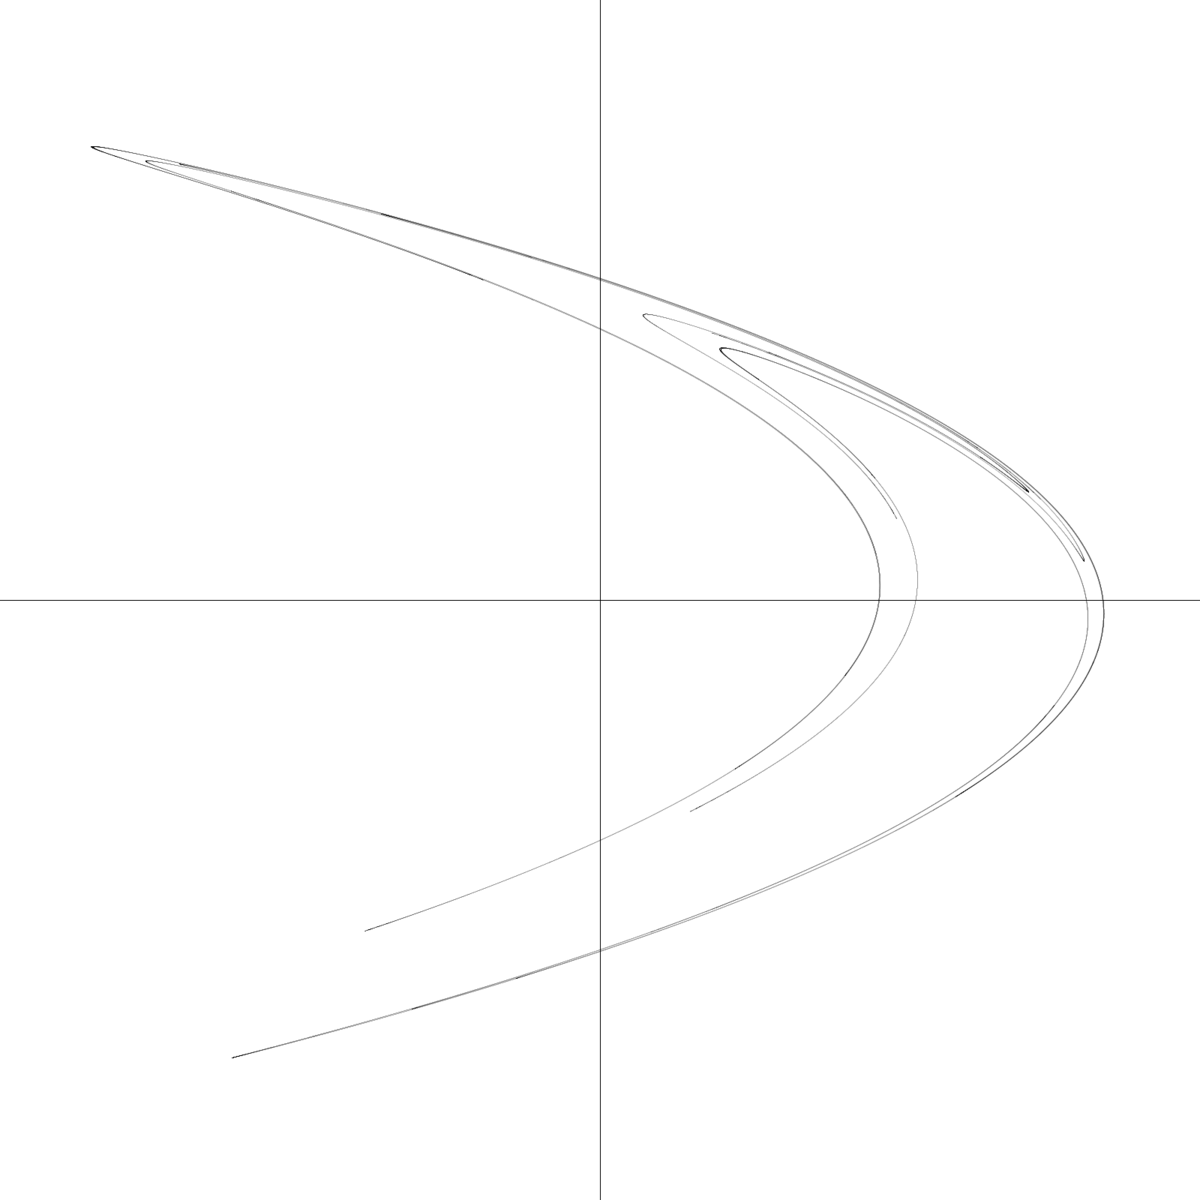 Henon attractor.png